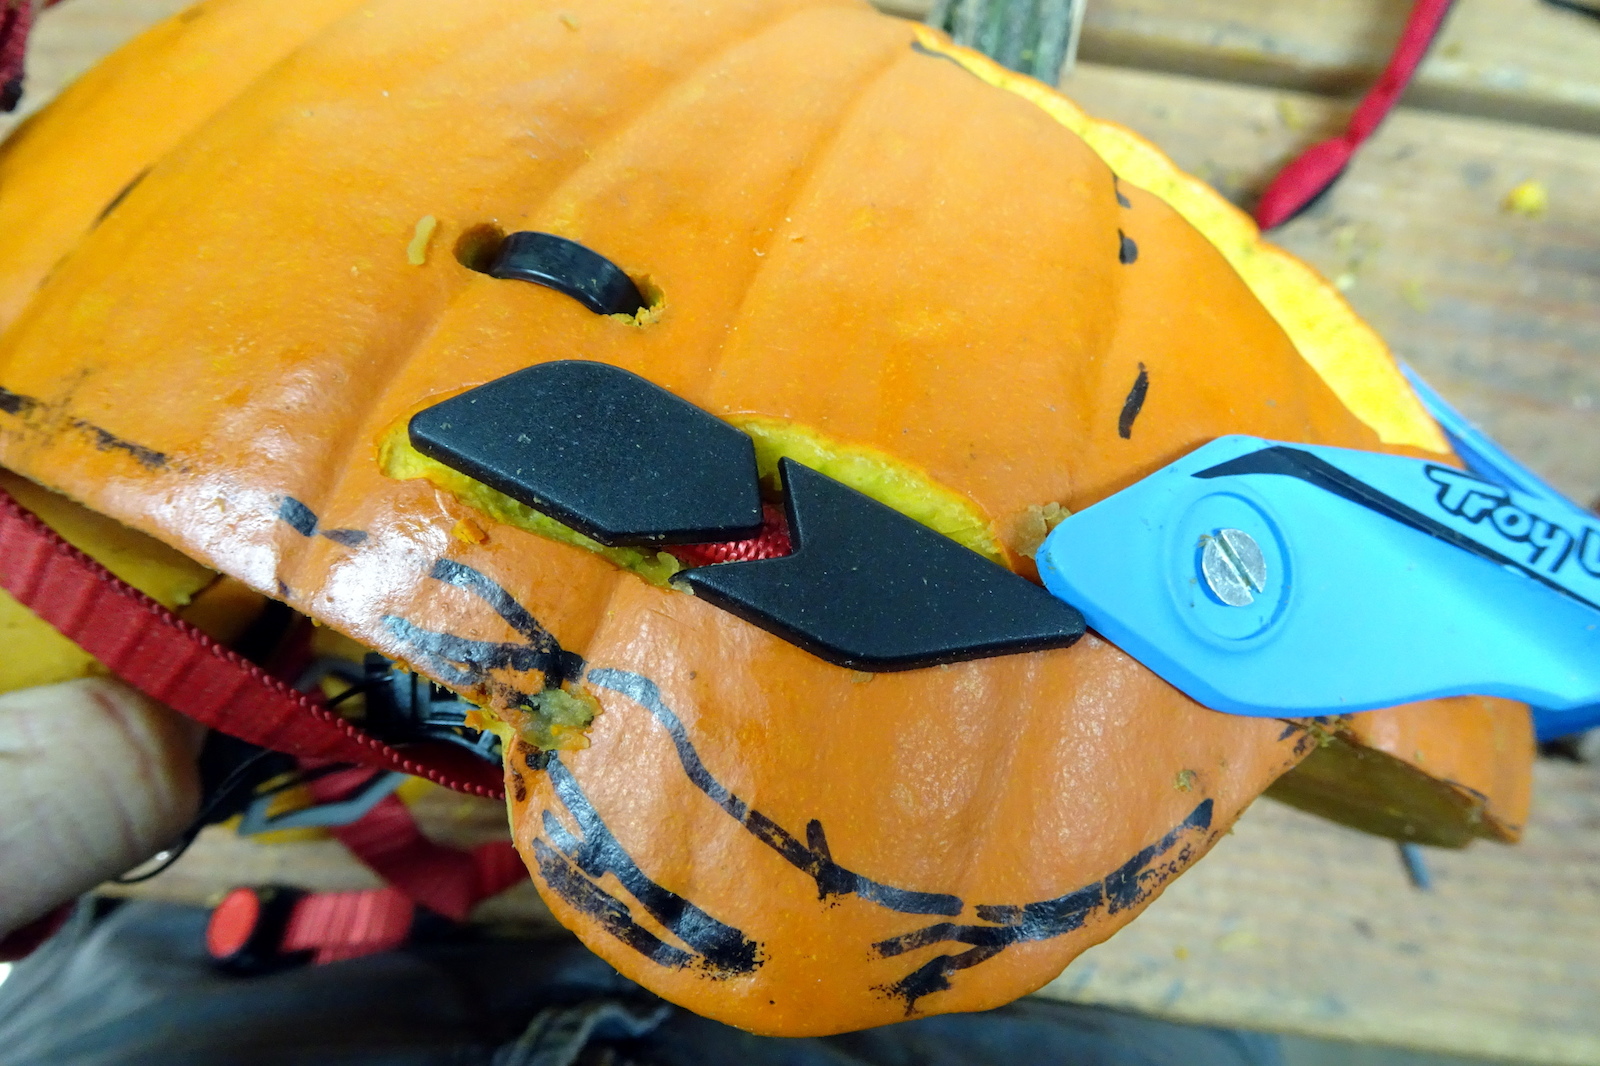 6 Use zip ties and creative slots to fix the webbing from an old lid to your fresh pumpkin.